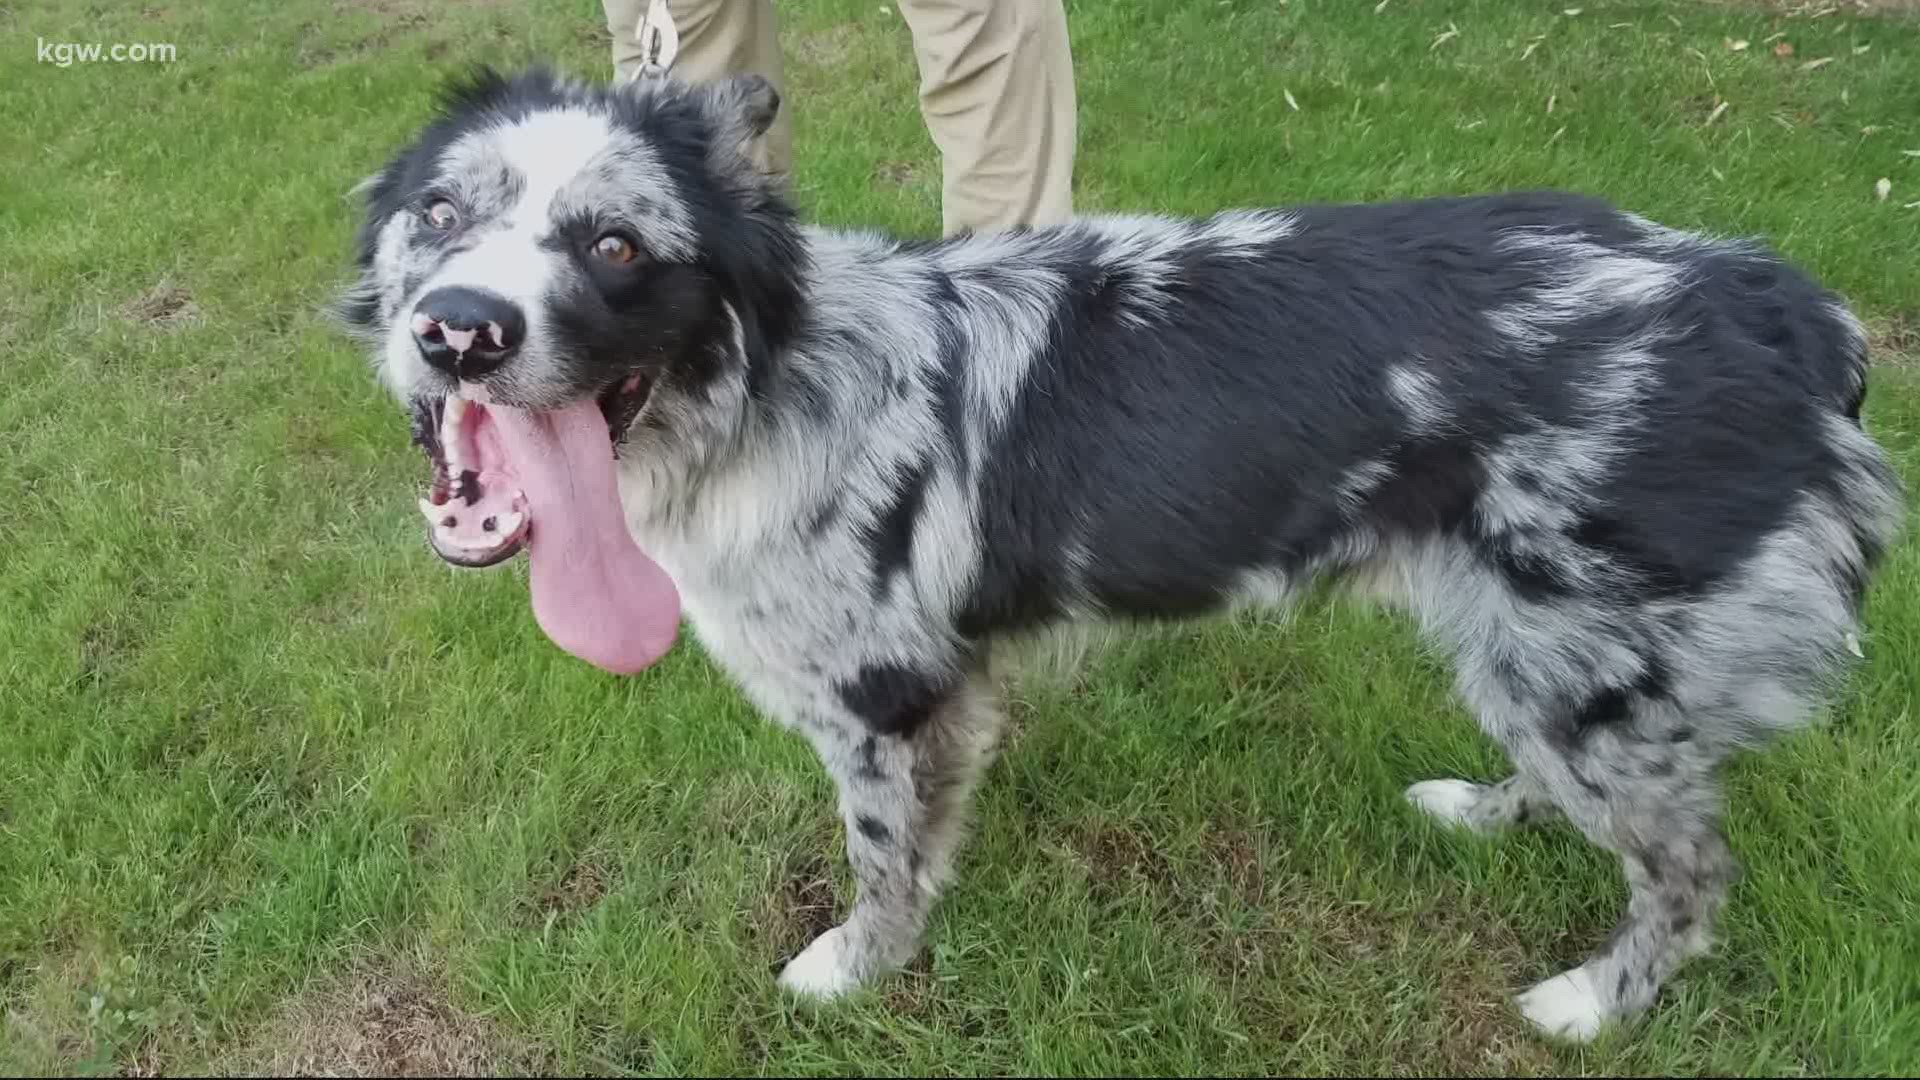 Gail Krueger was trying to find the owner of a lost dog when someone stole her car with her 3-year-old Australian shepherd inside.